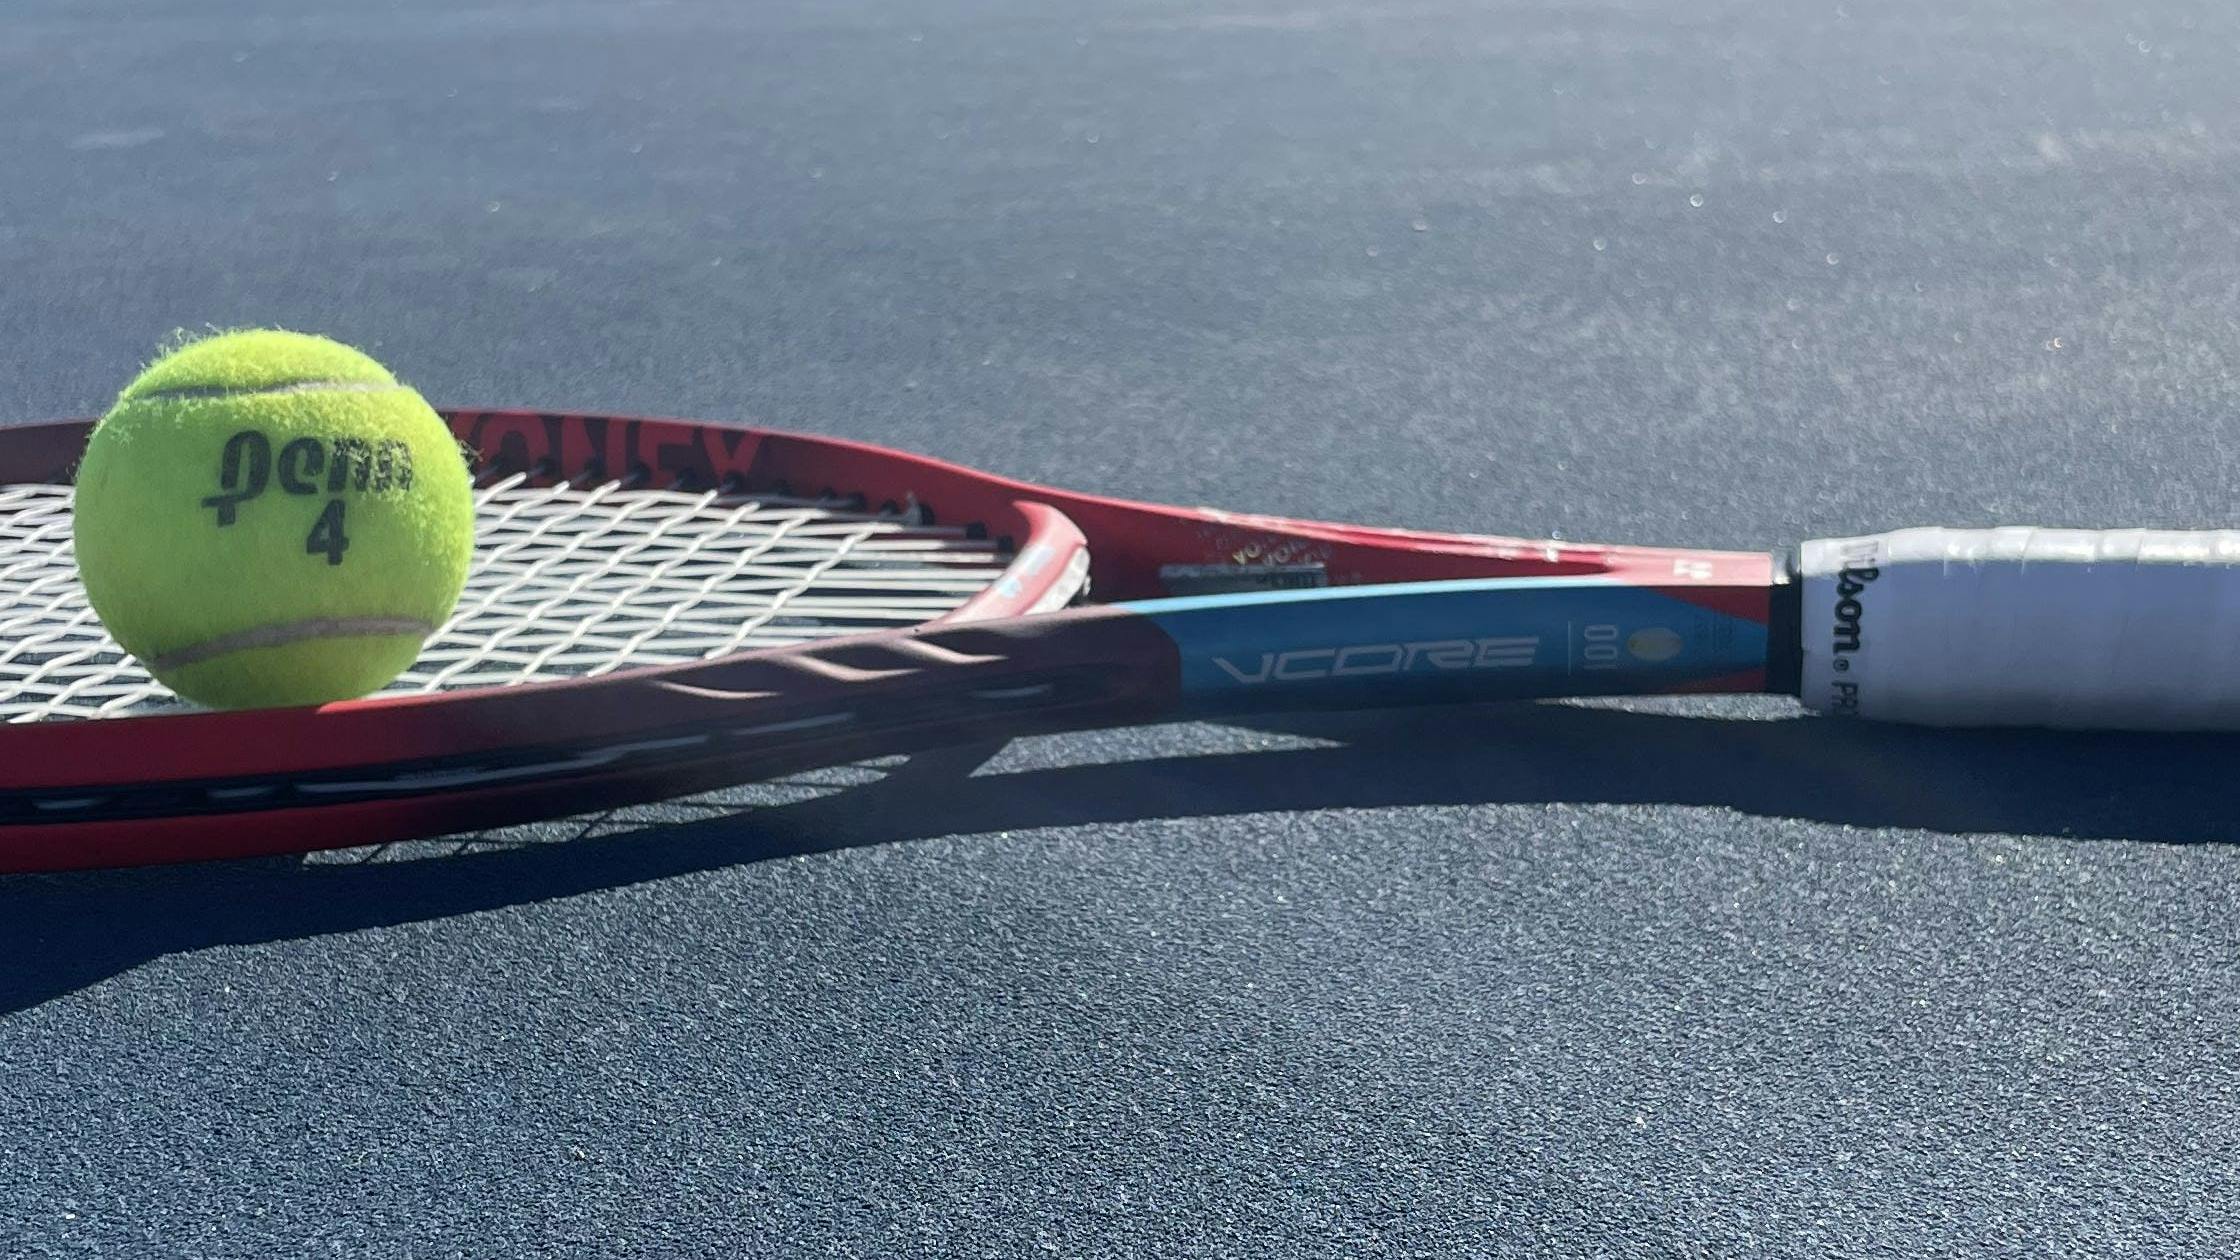 The Yonex Vcore 100 Racquet laying on a tennis court. 